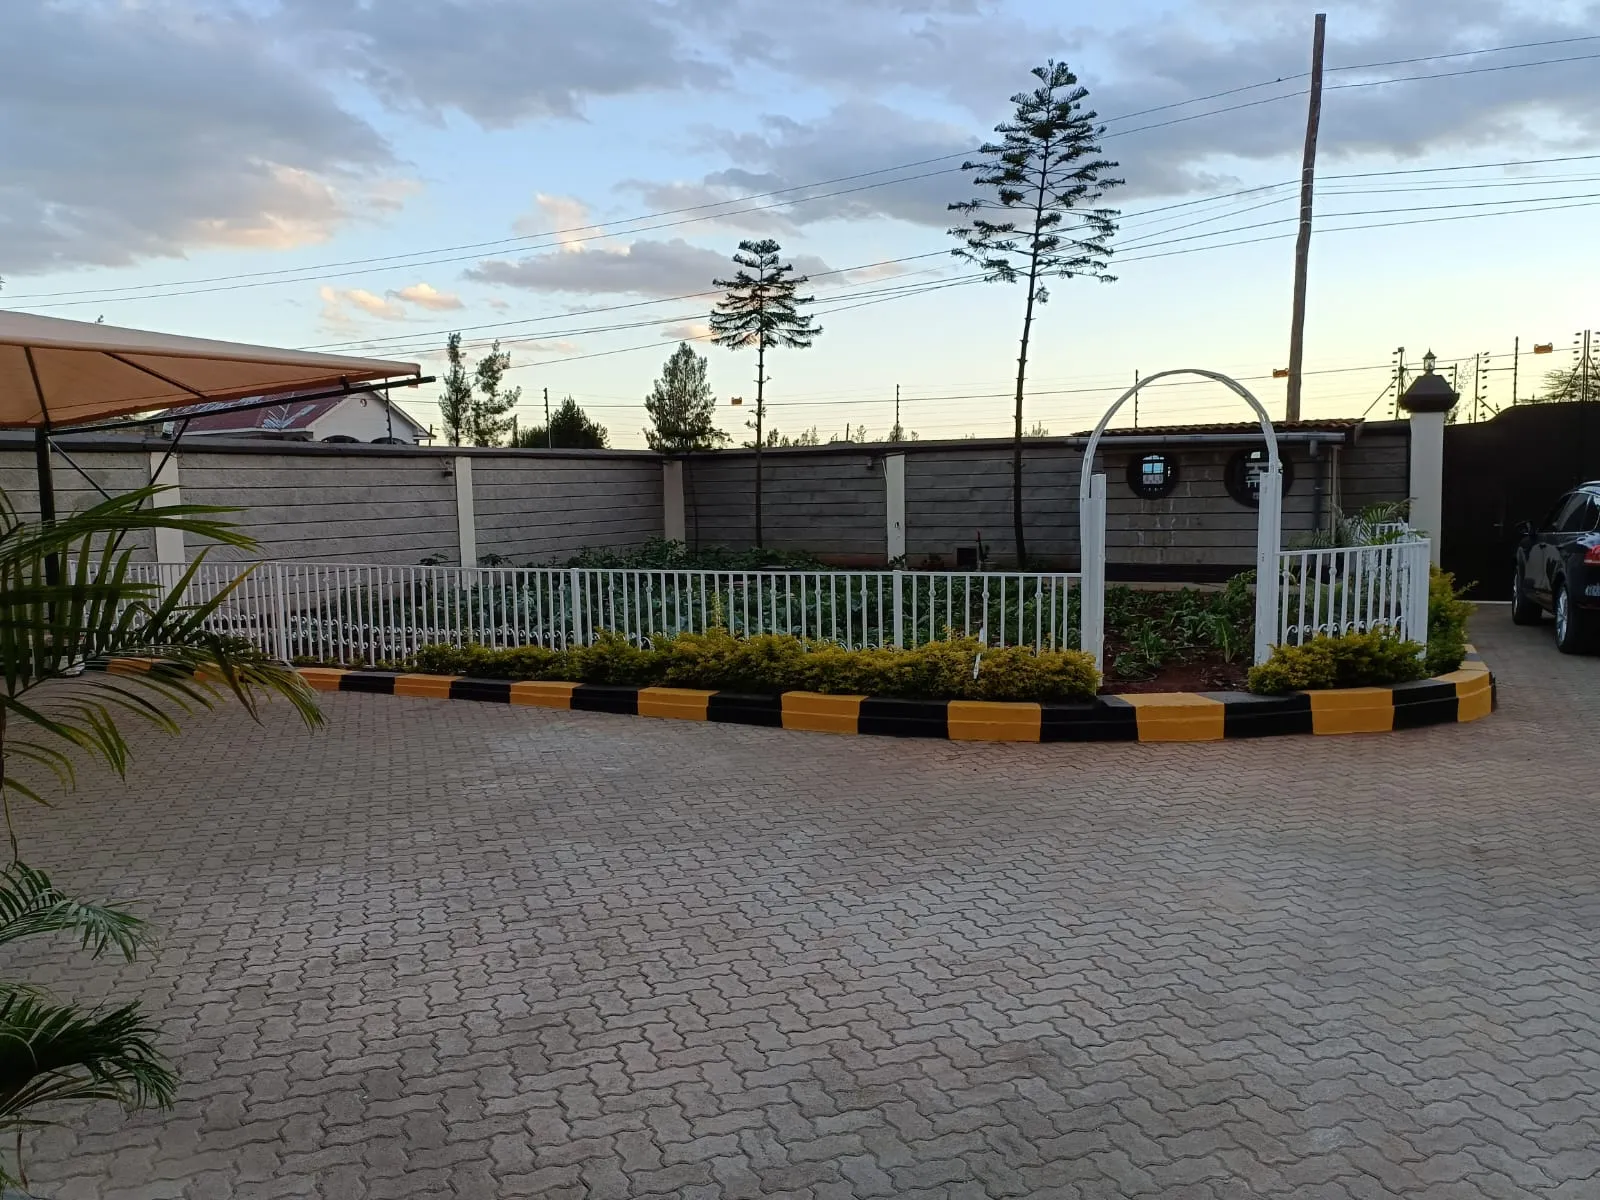 7 bedroom all ensuite Mansion for sale in Acacia kitengela with SQ gym CCTV Garden etc House 7 bedrooms exclusive